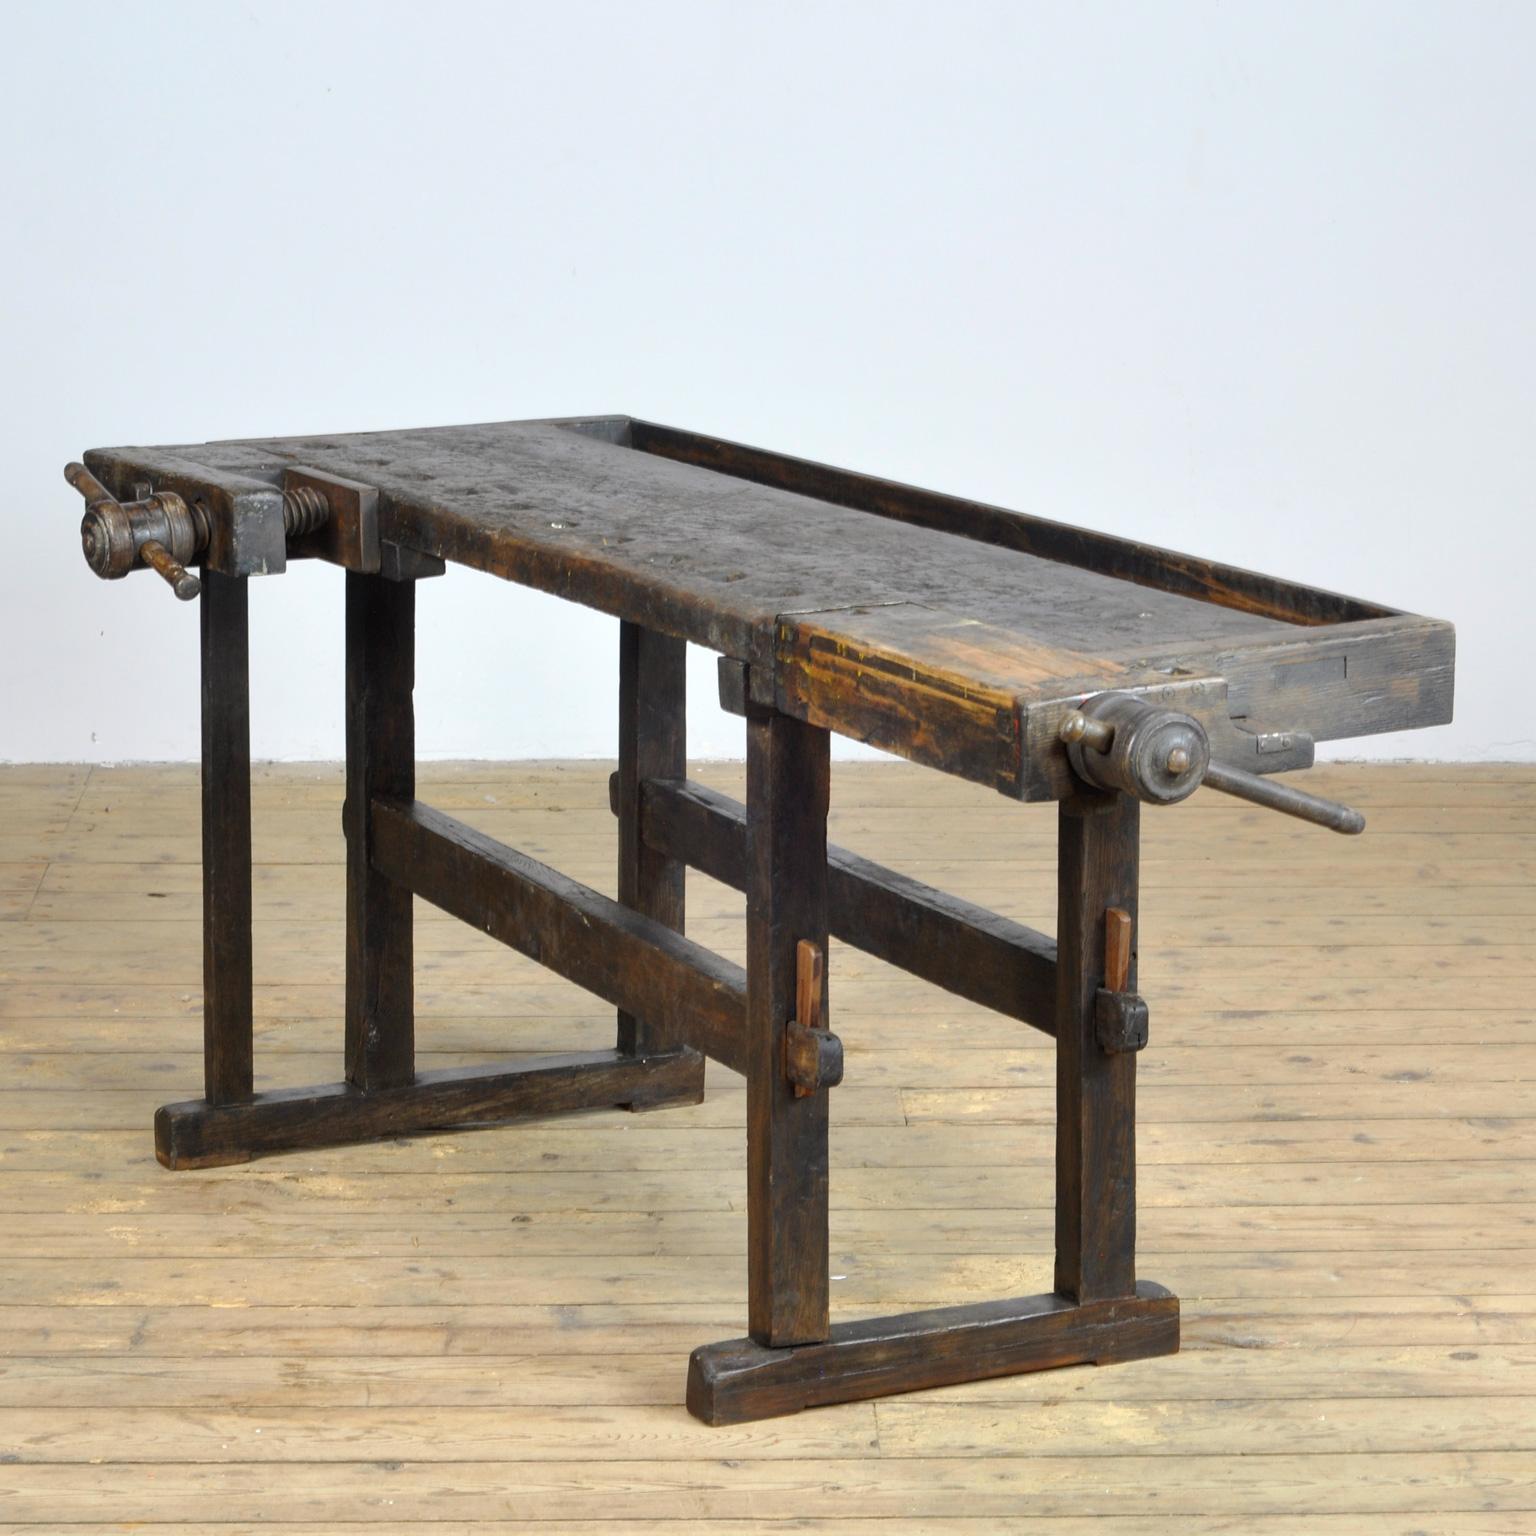 This antique workbench has two built-in wooden vices screws and a recessed tray where the carpenter would put his tools. It was manufactured, circa 1900. Made from oak. Beautiful patina after years of use. The workbench has been treated for